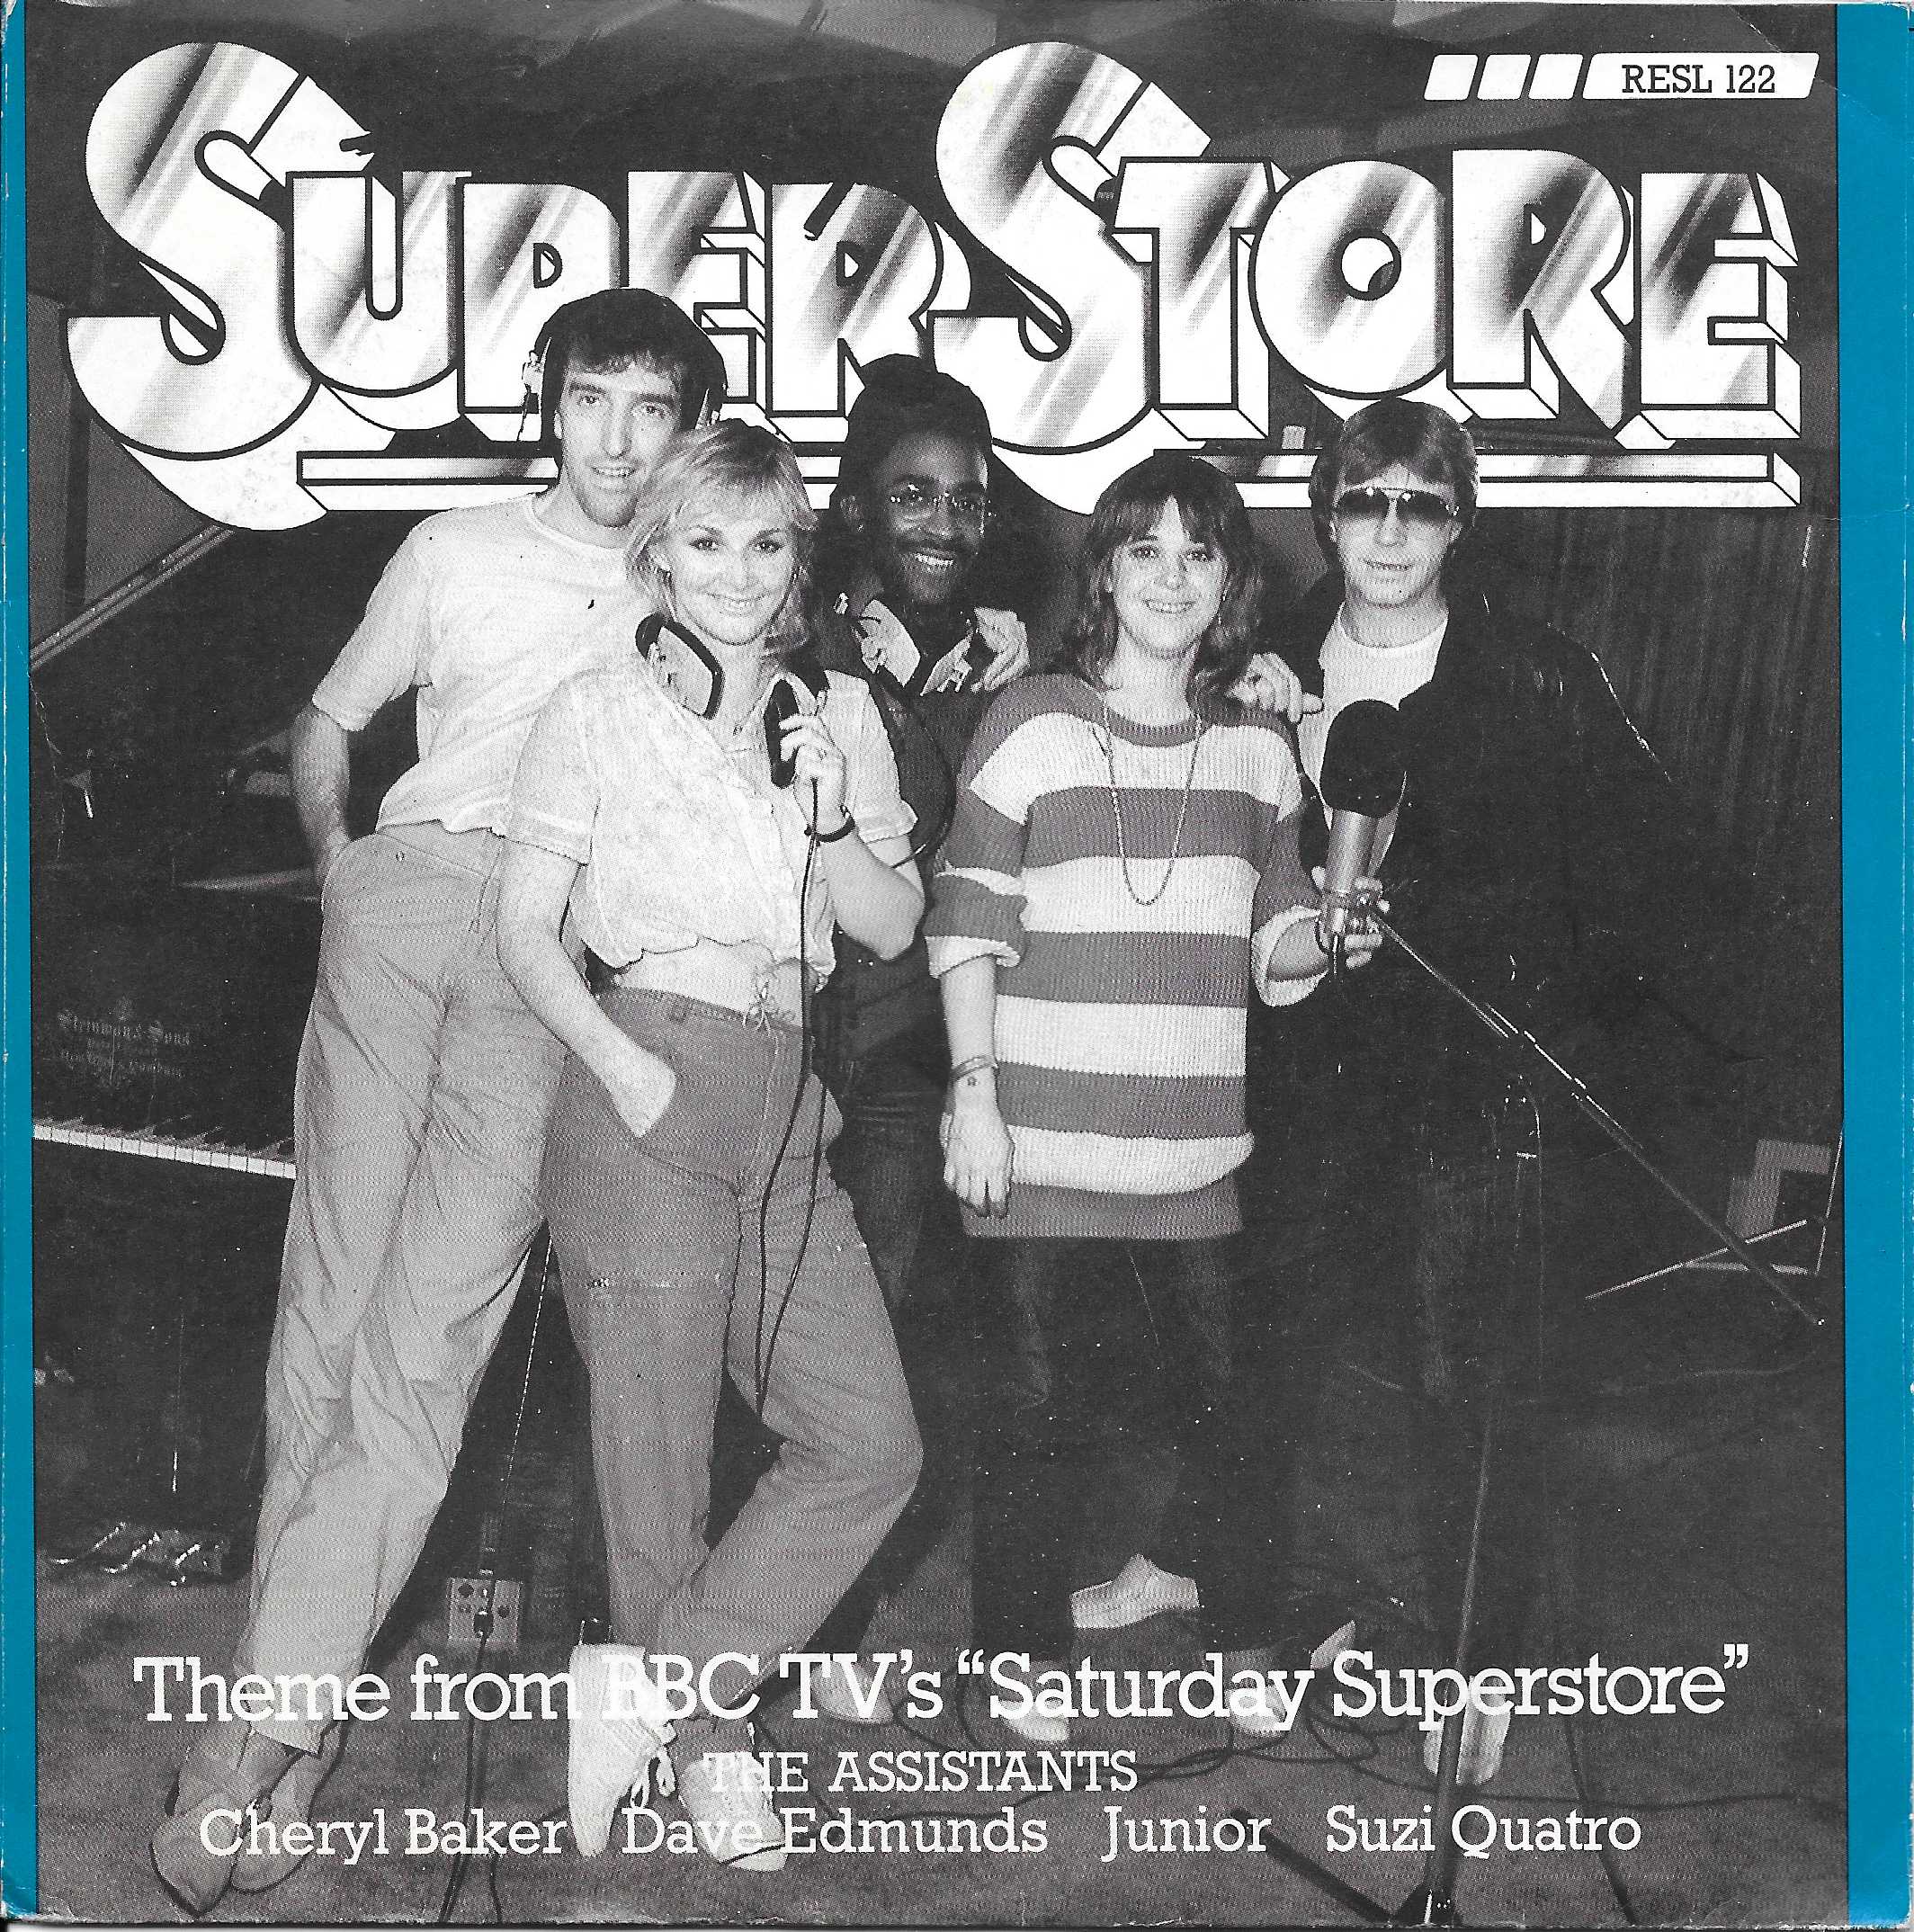 Picture of Down at the superstore (Saturday superstore) by artist B. A. Robertson from the BBC singles - Records and Tapes library